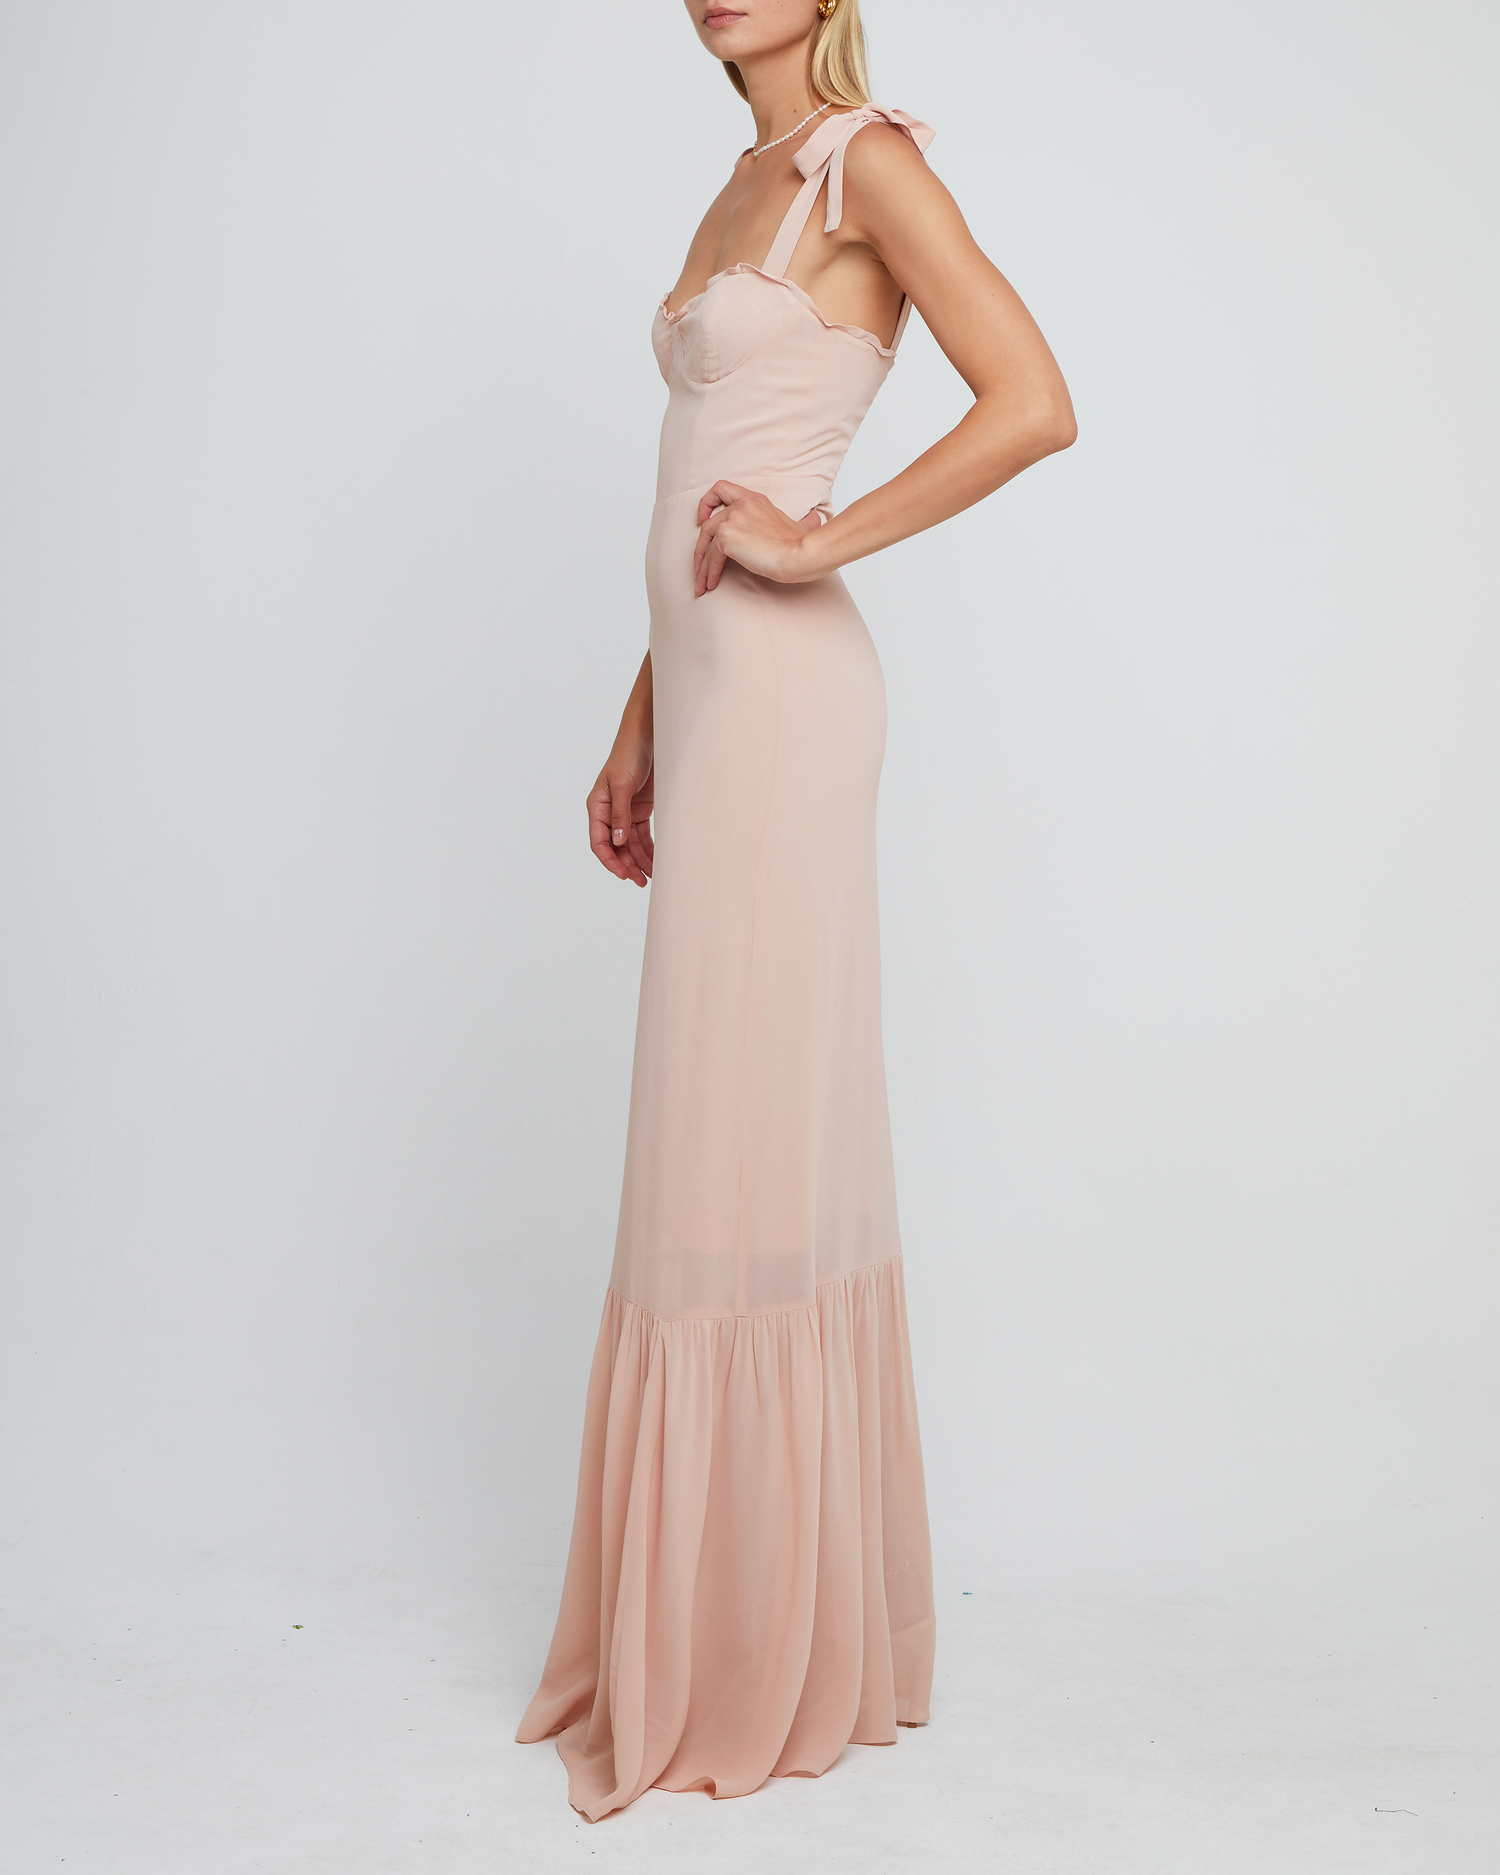 Third image of La Rue Dress, a pink floor-length bridesmaid dress with adjustable tie straps, cup detail, neckline ruffles, tiered skirt, lining, back smocking and back zipper